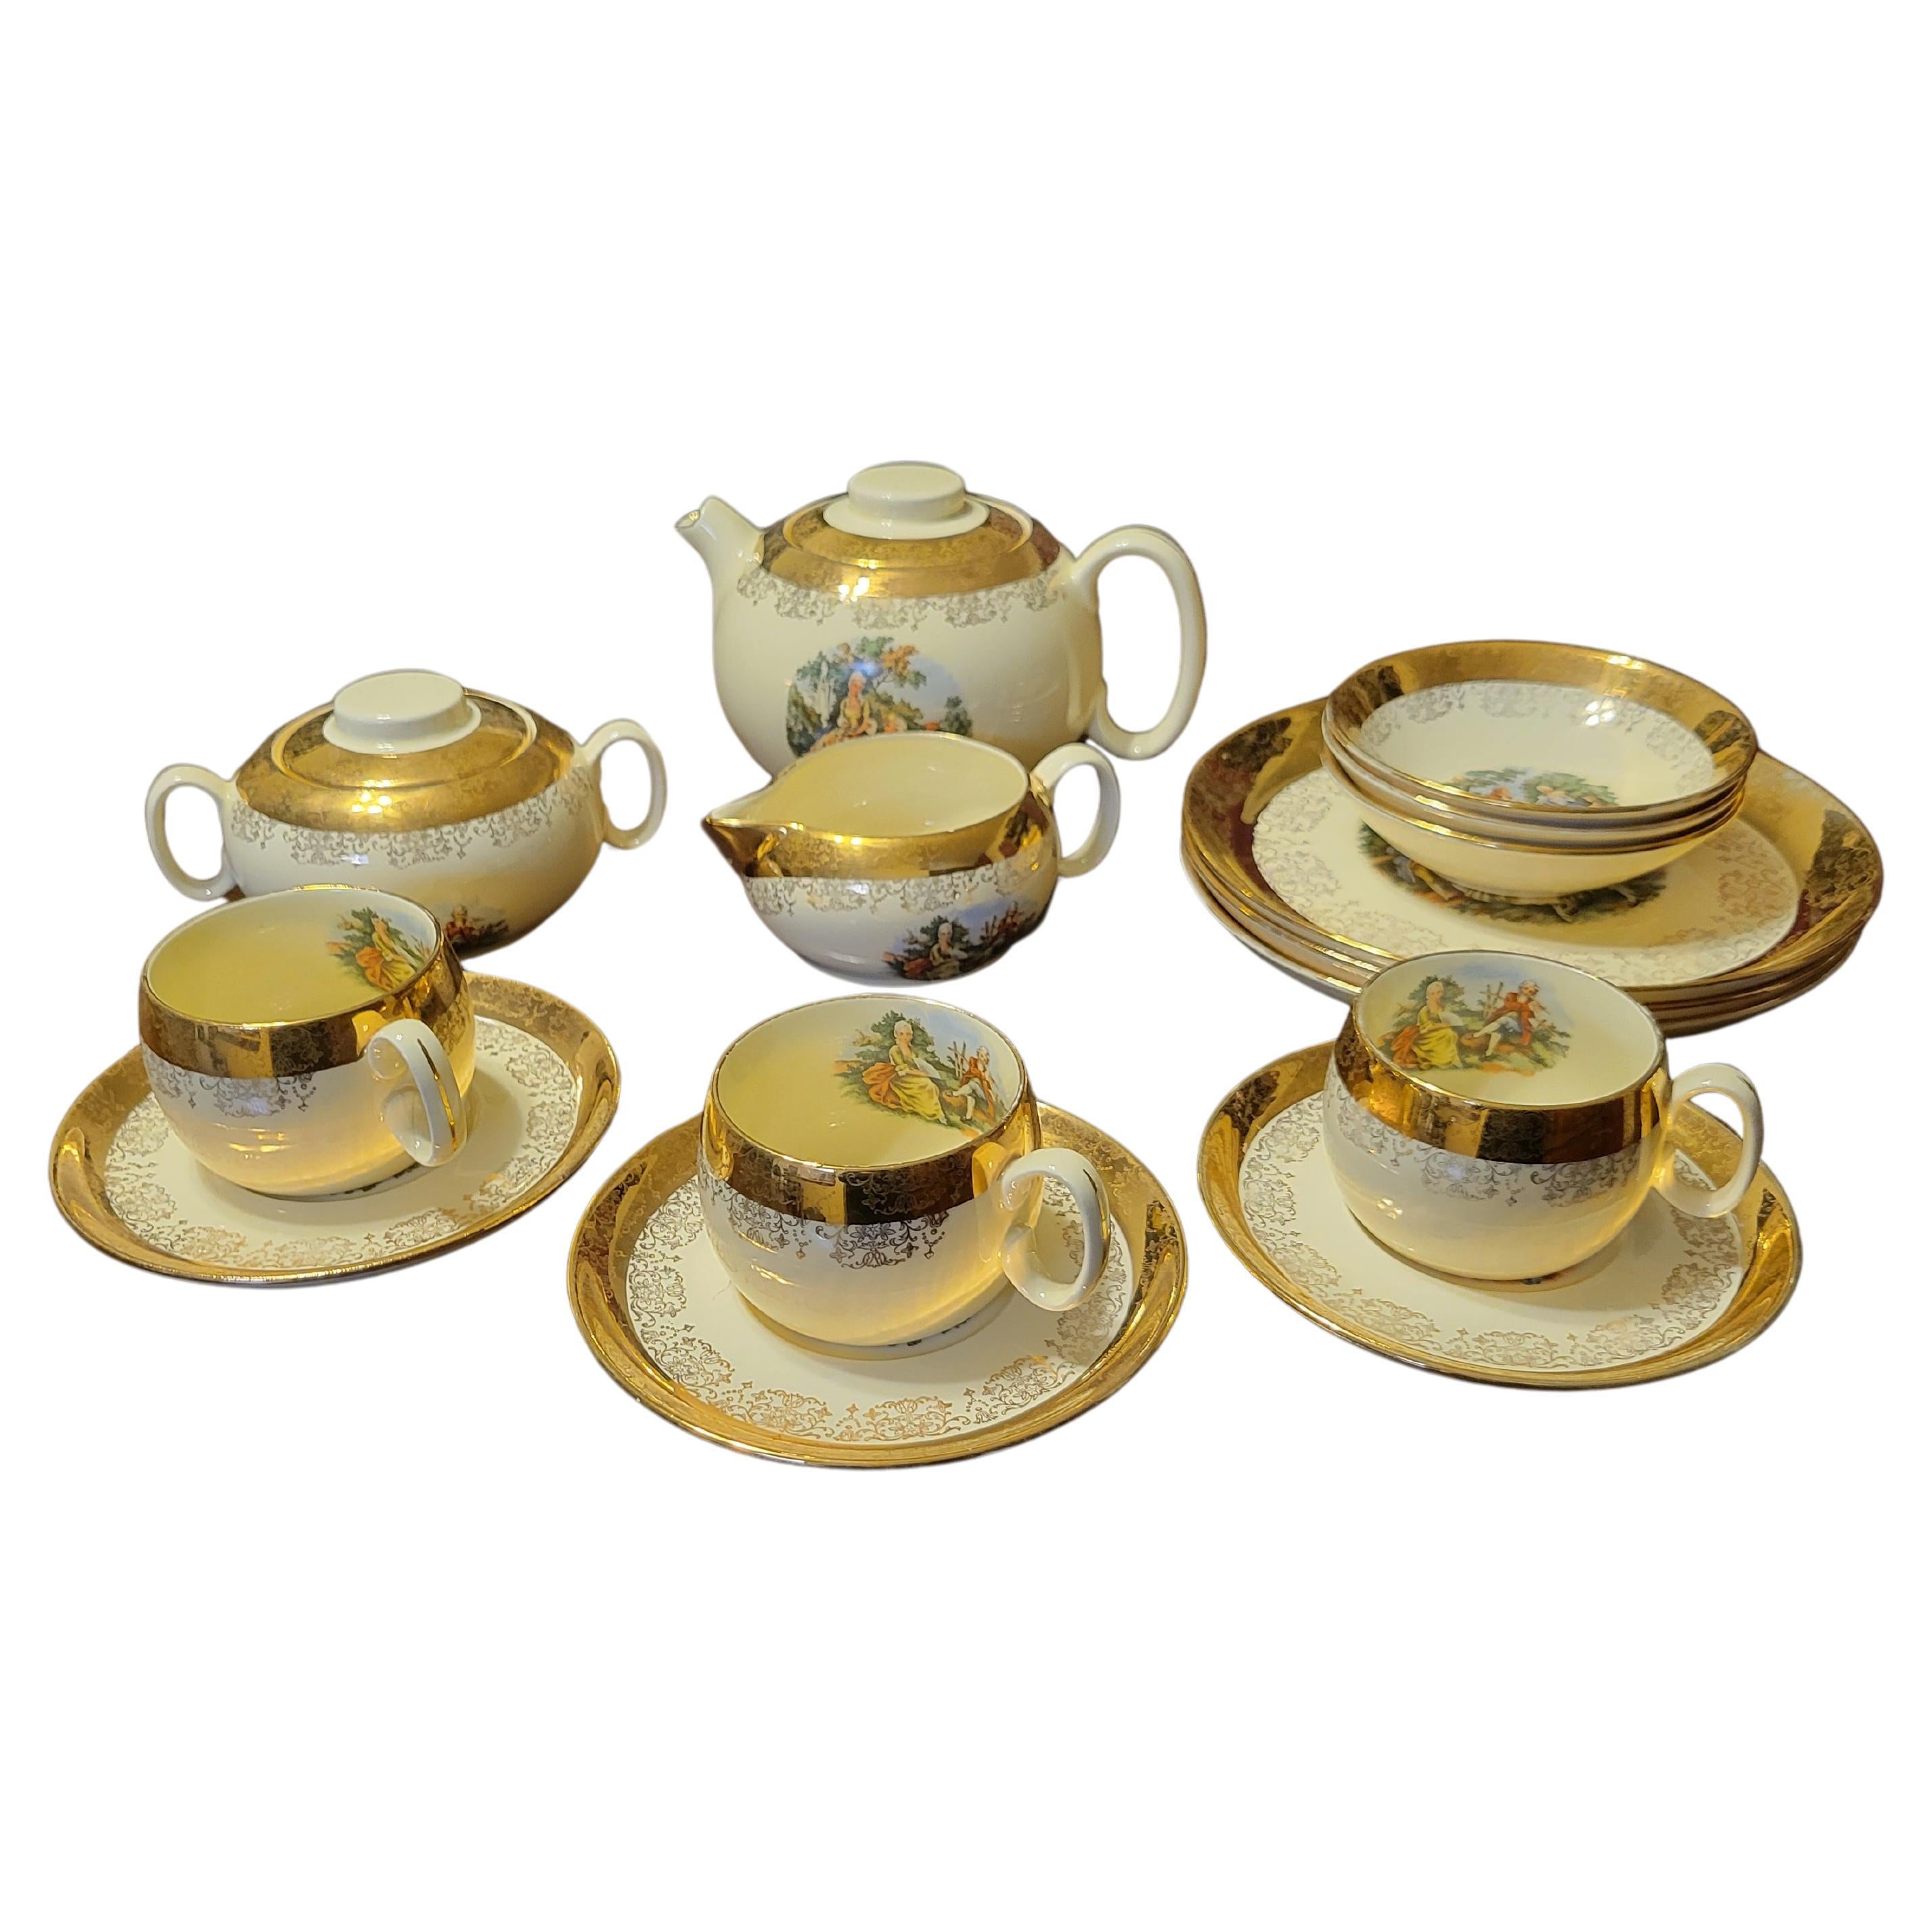 Sabin Crest-o-Gold 22K China Set with Teapot - 15 Pieces For Sale